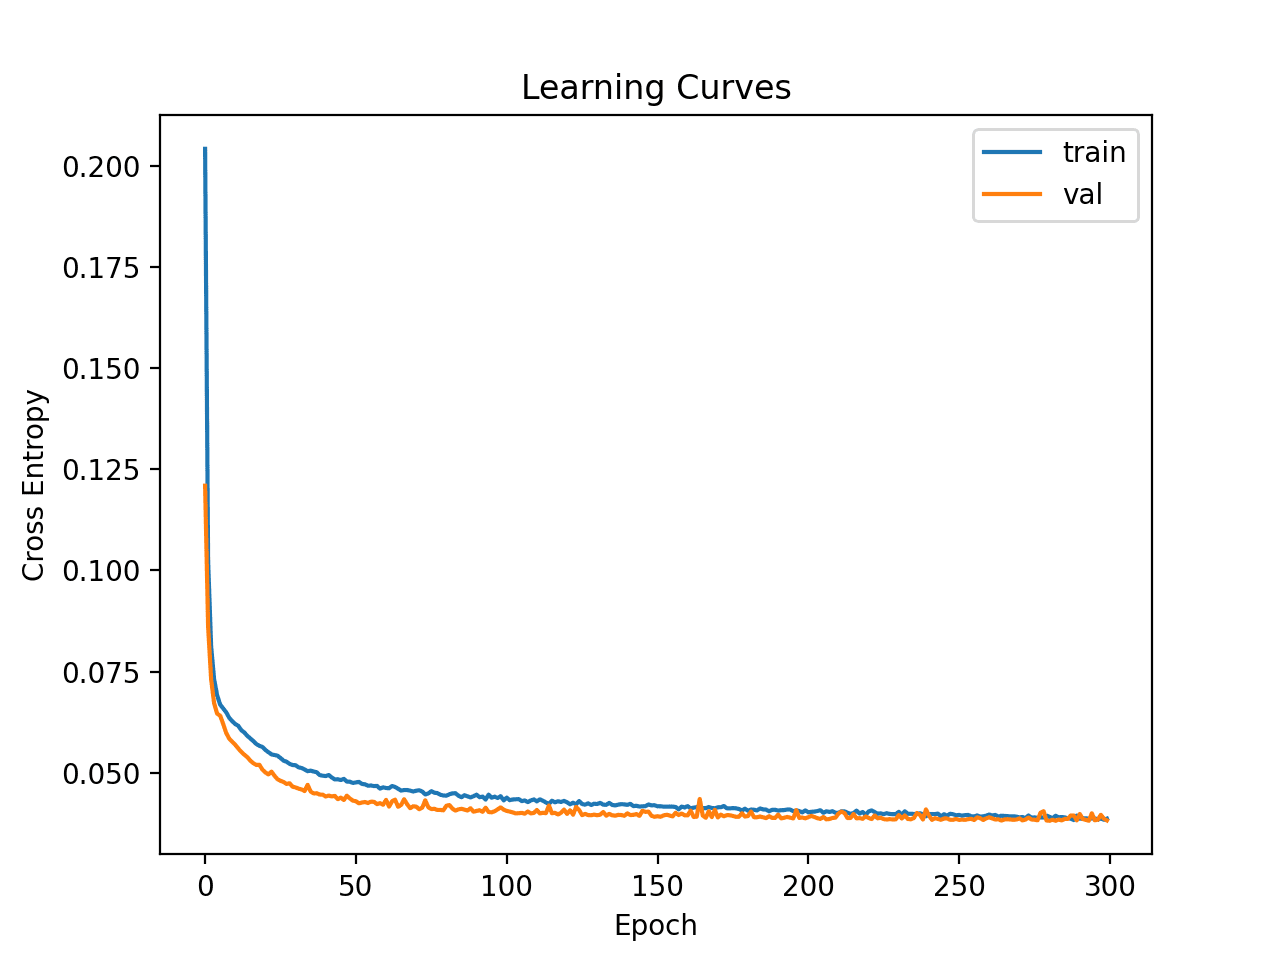 Learning Curves of Simple Multilayer Perceptron on the Mammography Dataset